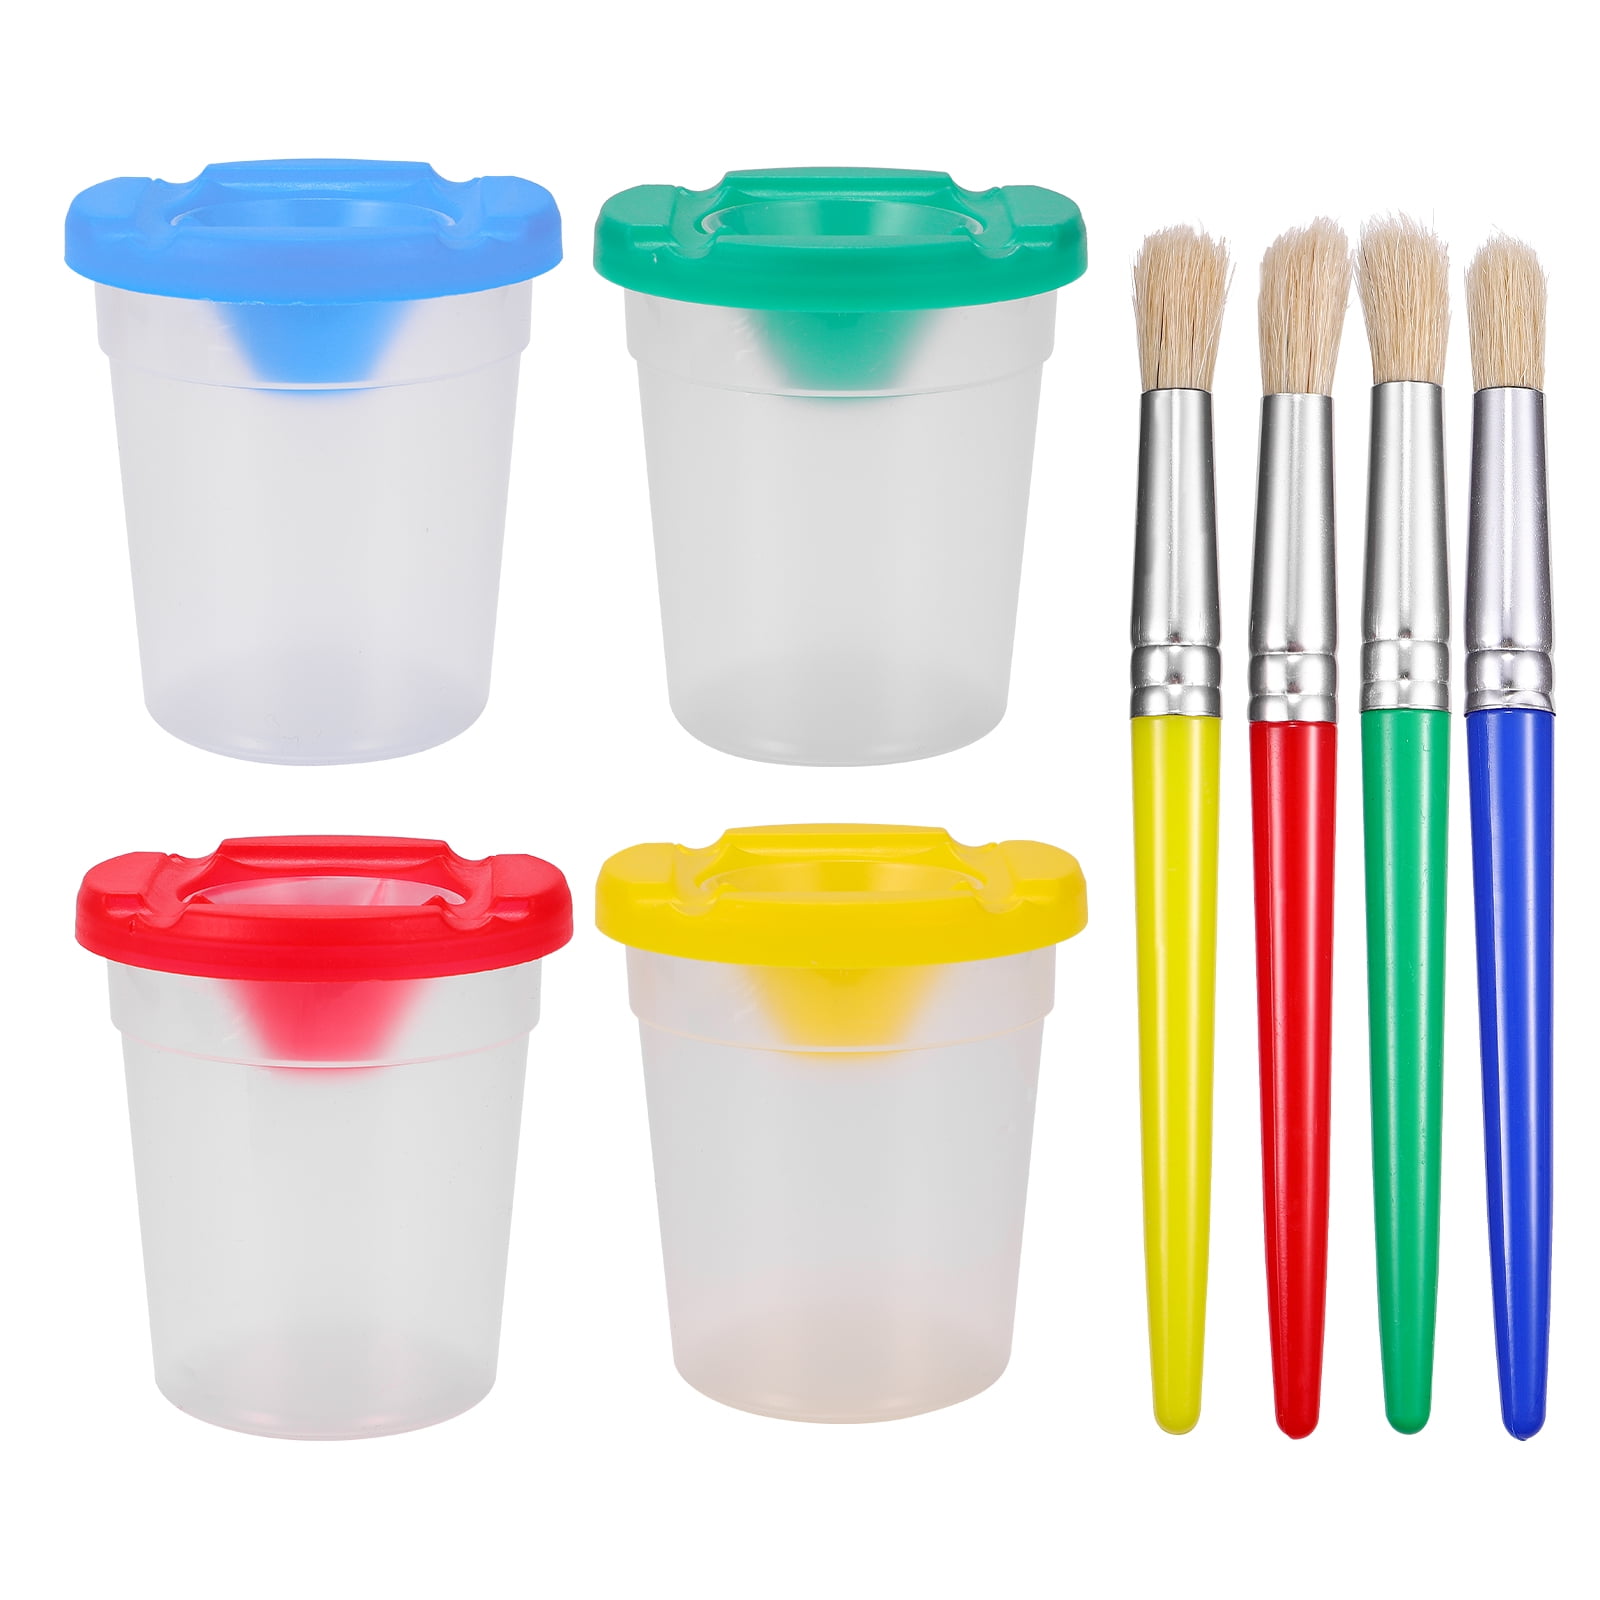 4pcs Paint Brushes and 4pcs No Spill Paint Cups with Lids for Kids  Beginners - AliExpress